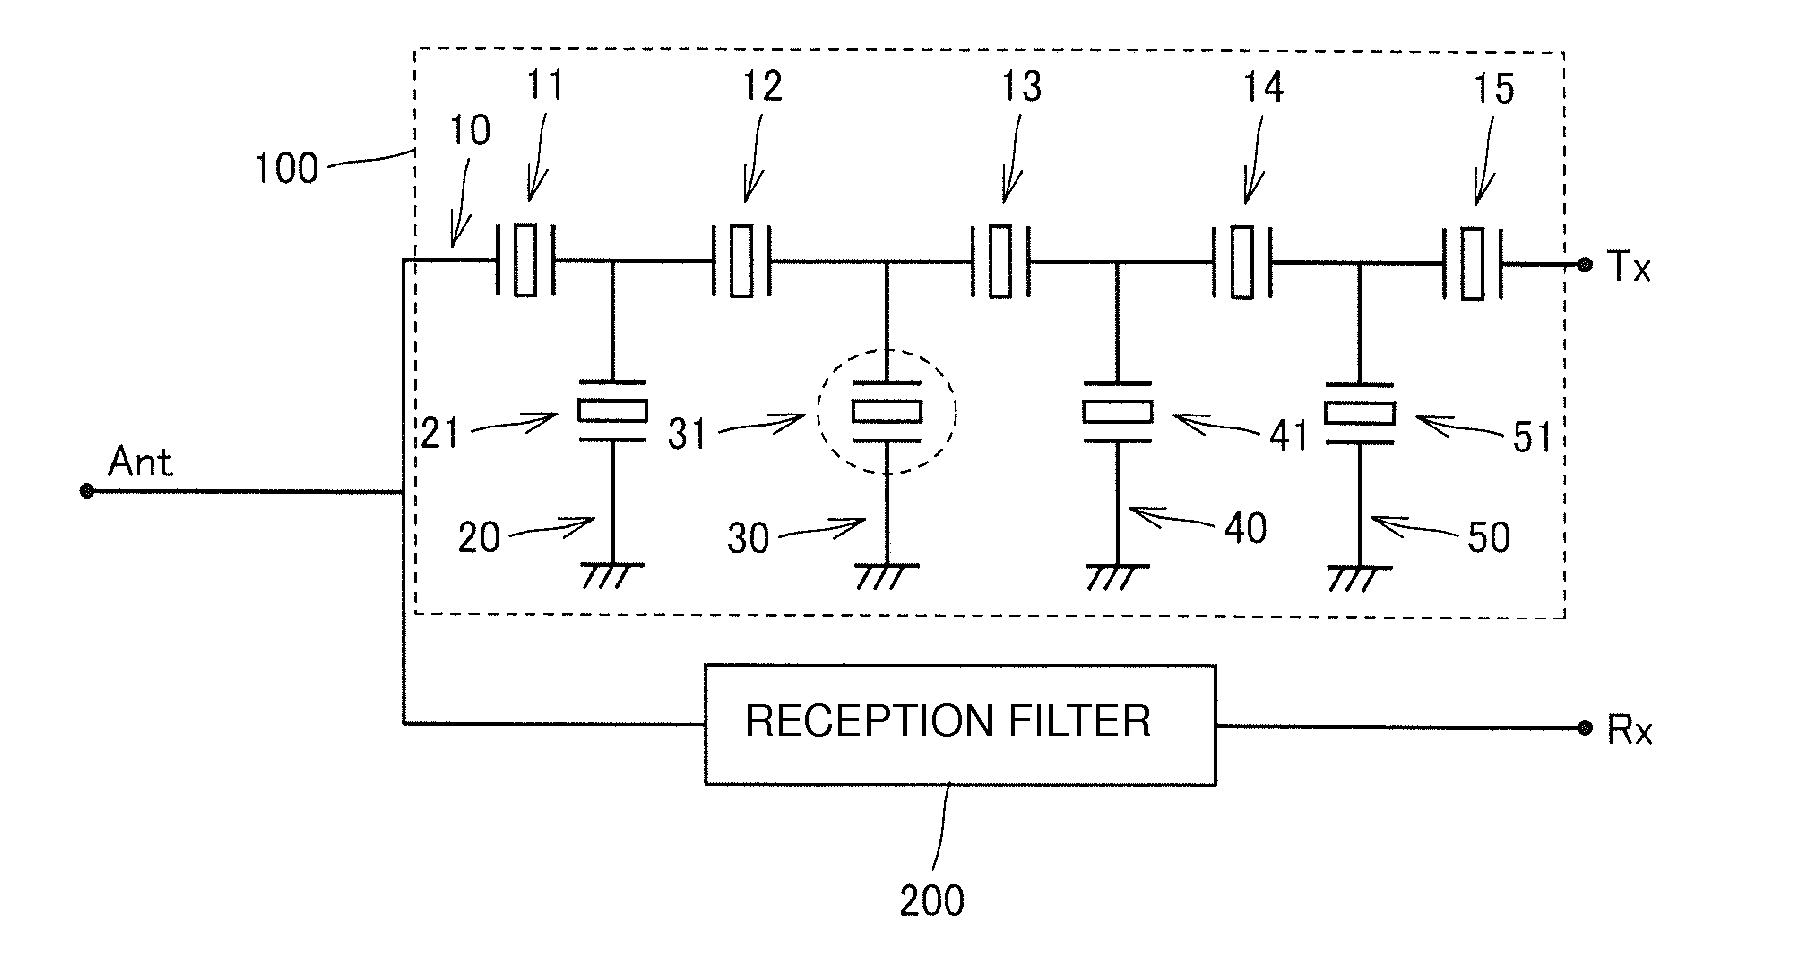 Signal separation device